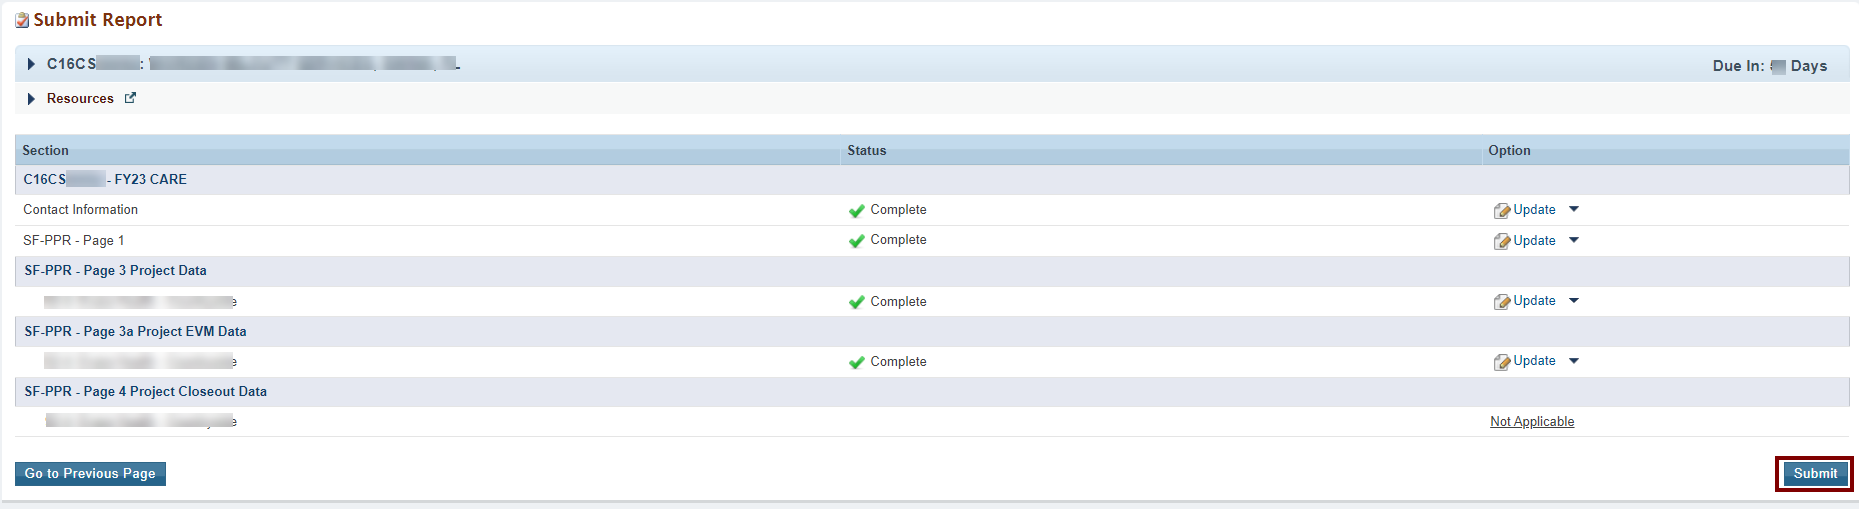 Screenshot of Submit report page